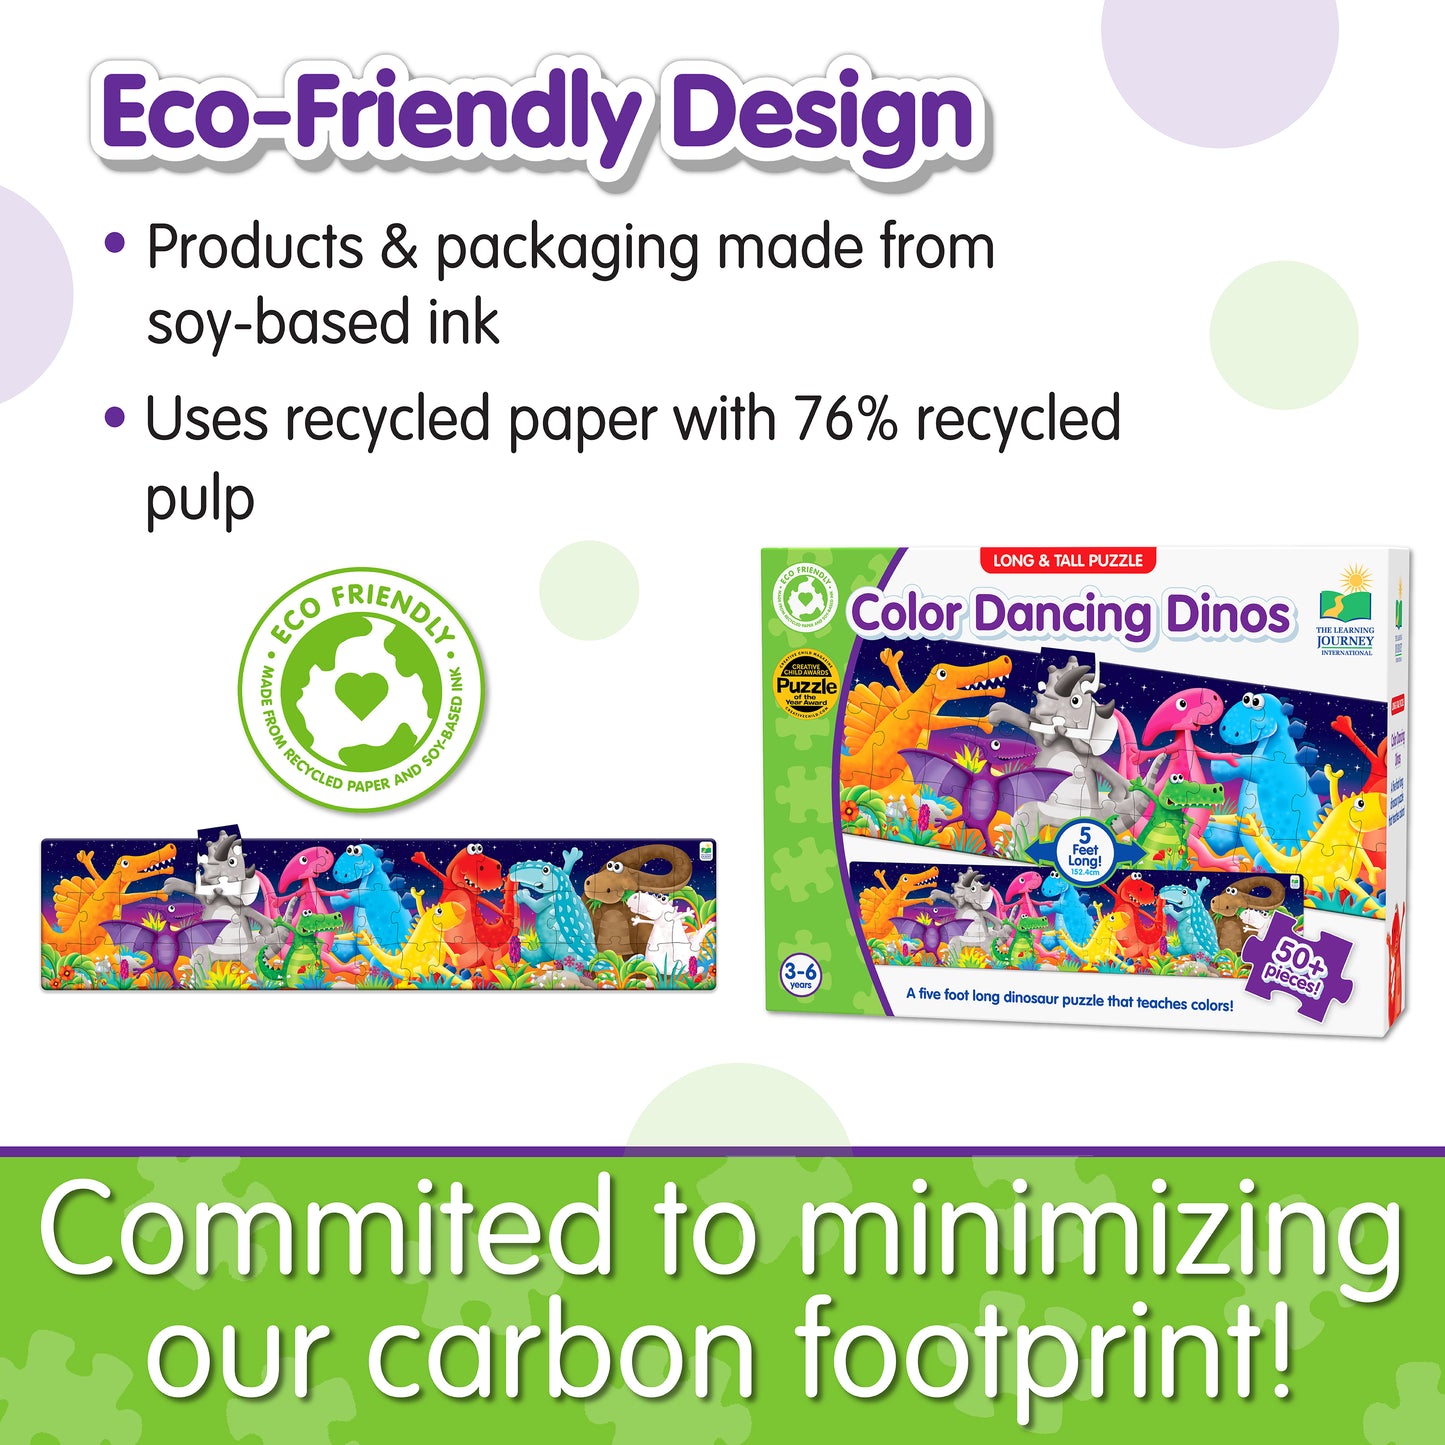 Infographic about Long and Tall Color Dancing Dinos Puzzle's eco-friendly design that says, "Committed to minimizing our carbon footprint!"